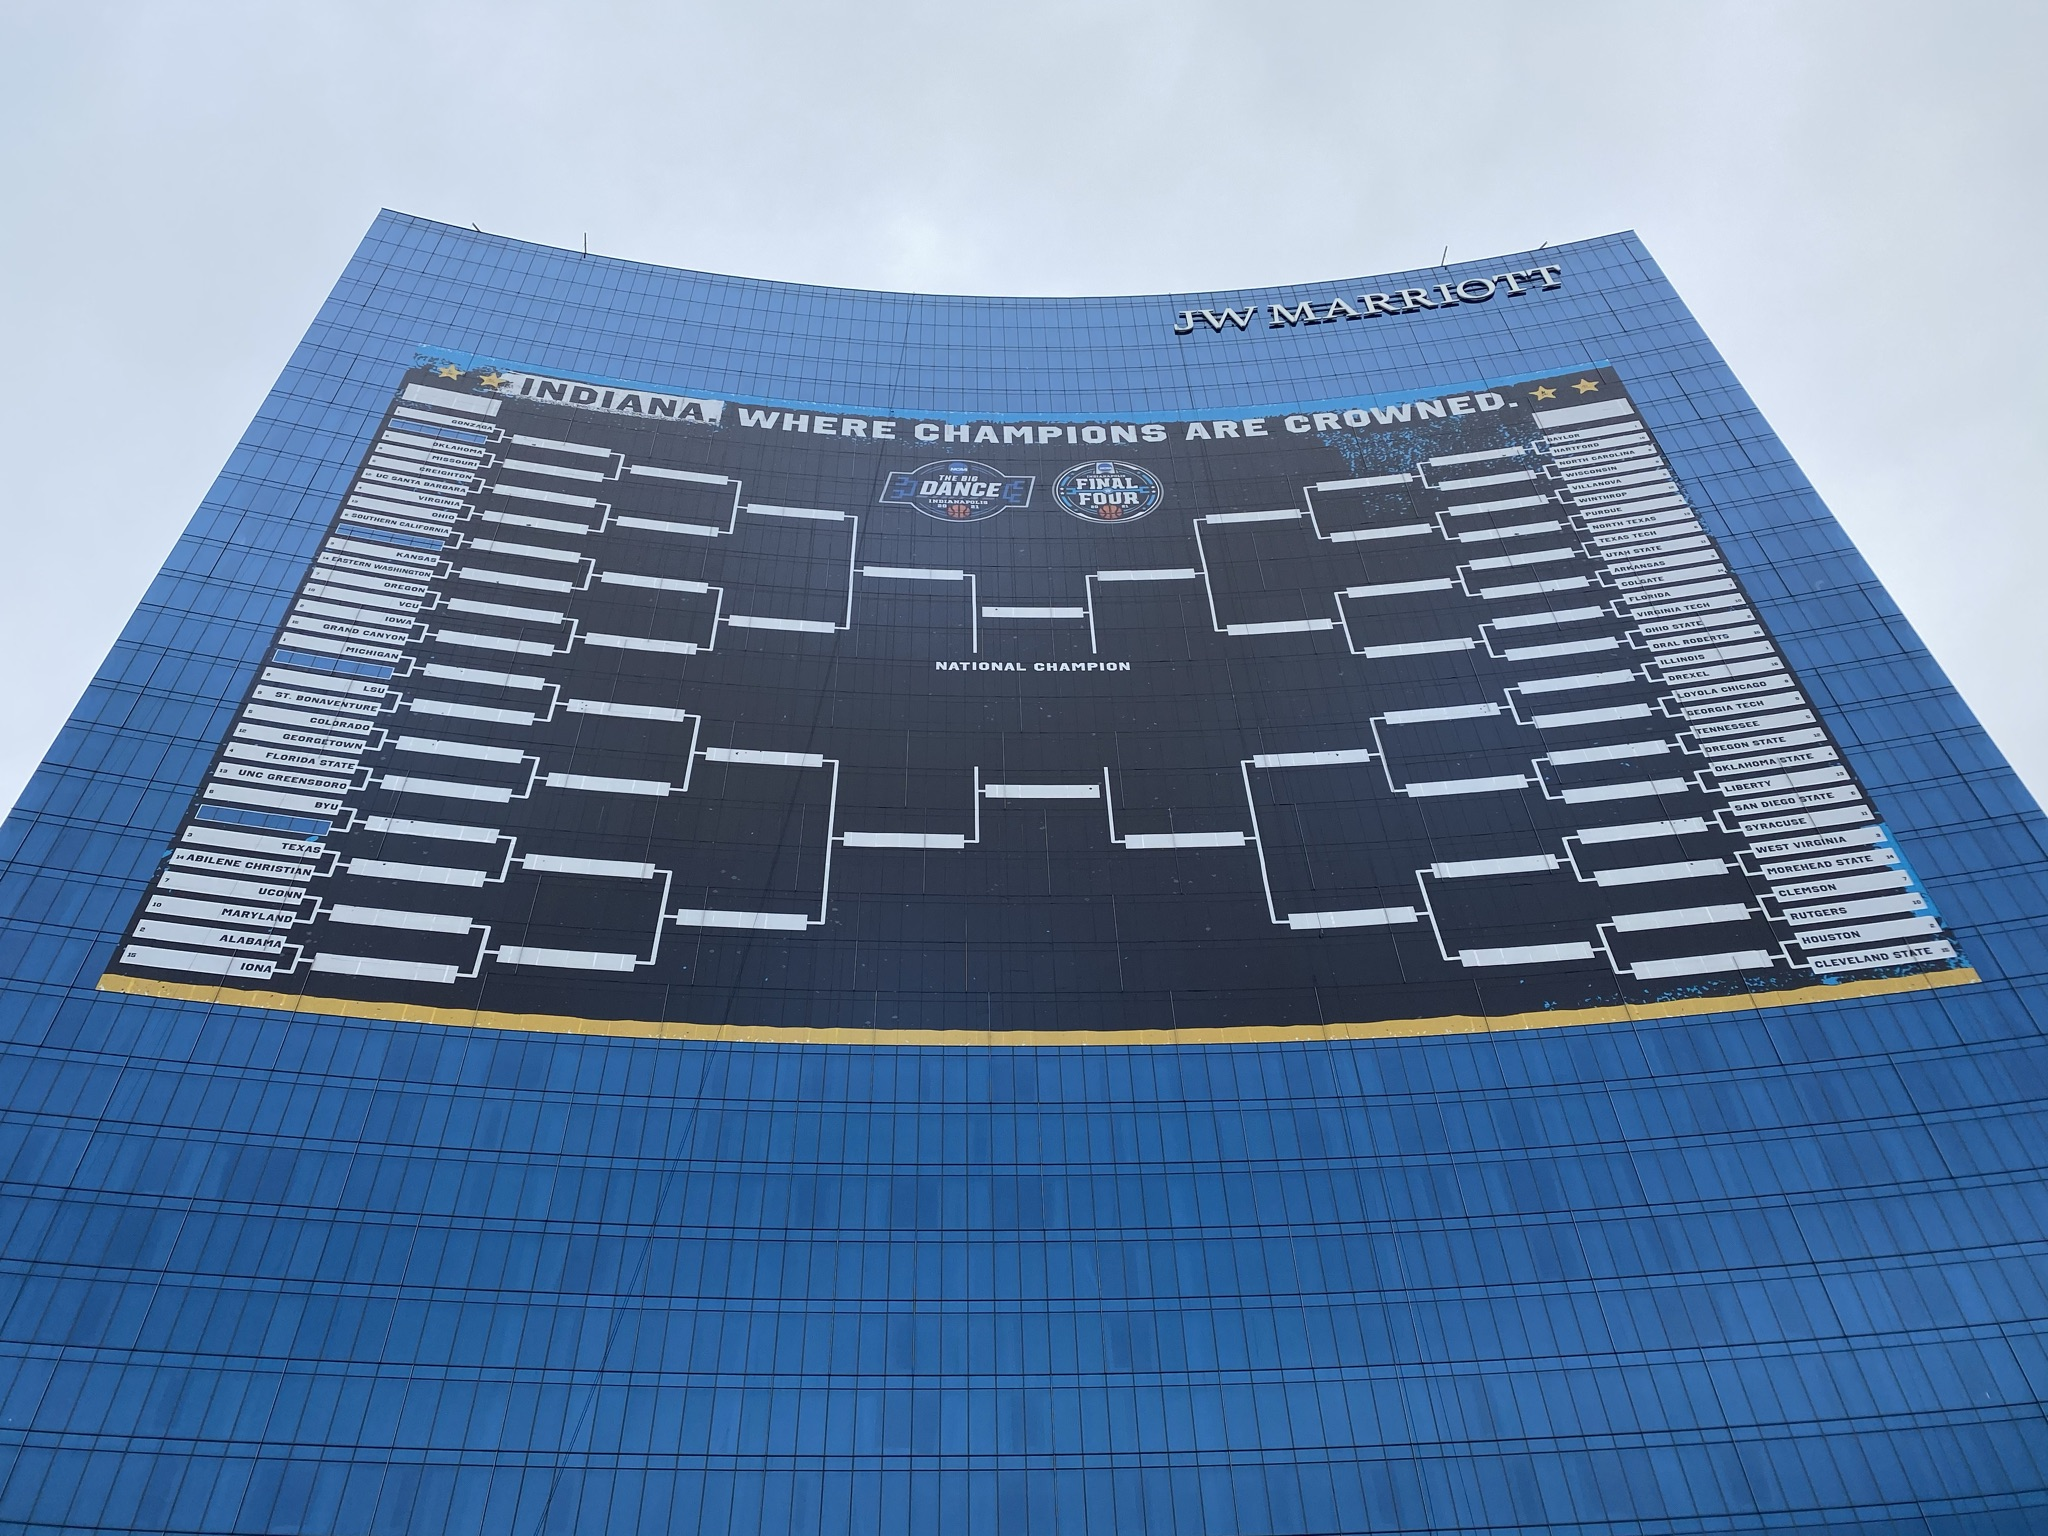 Checking in from Indianapolis, home to the 2021 NCAA Tournament